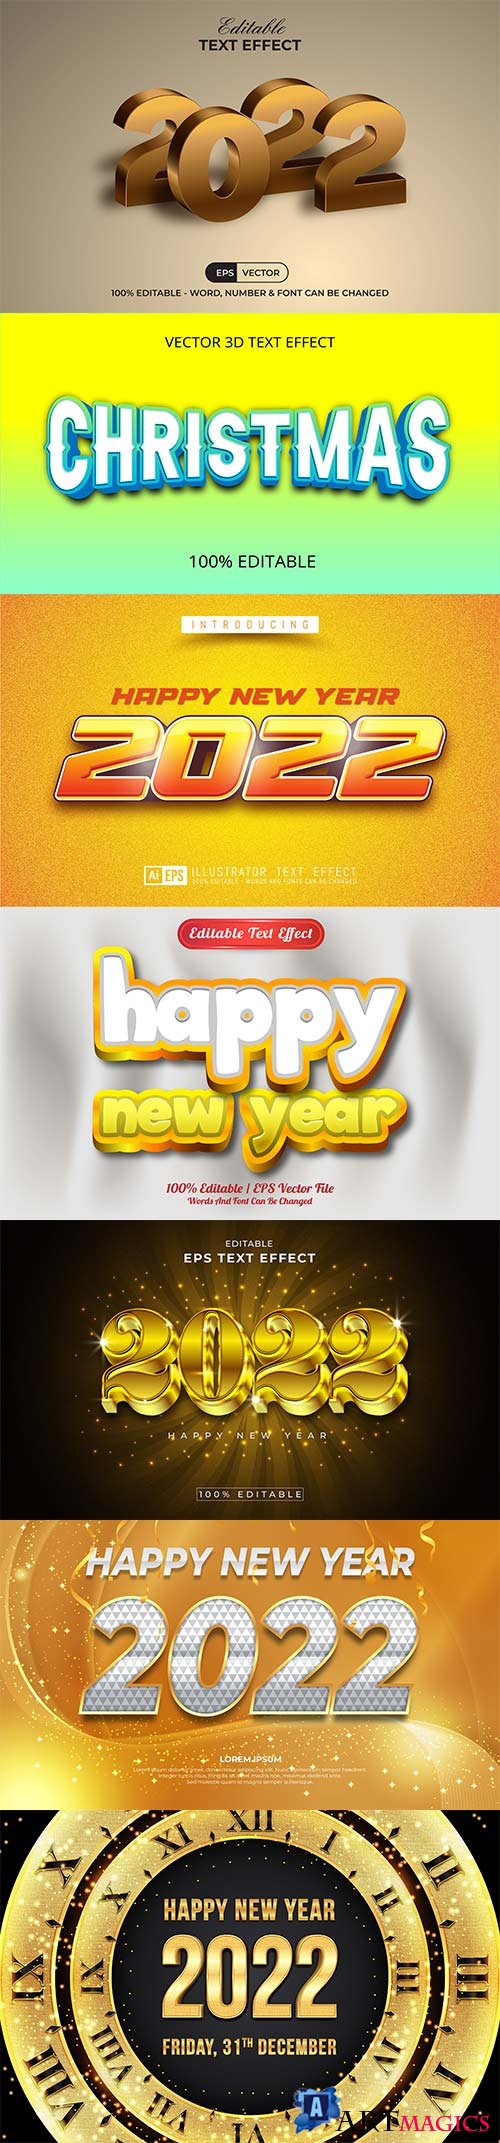 2022 New year and christmas editable text effect vector vol 39